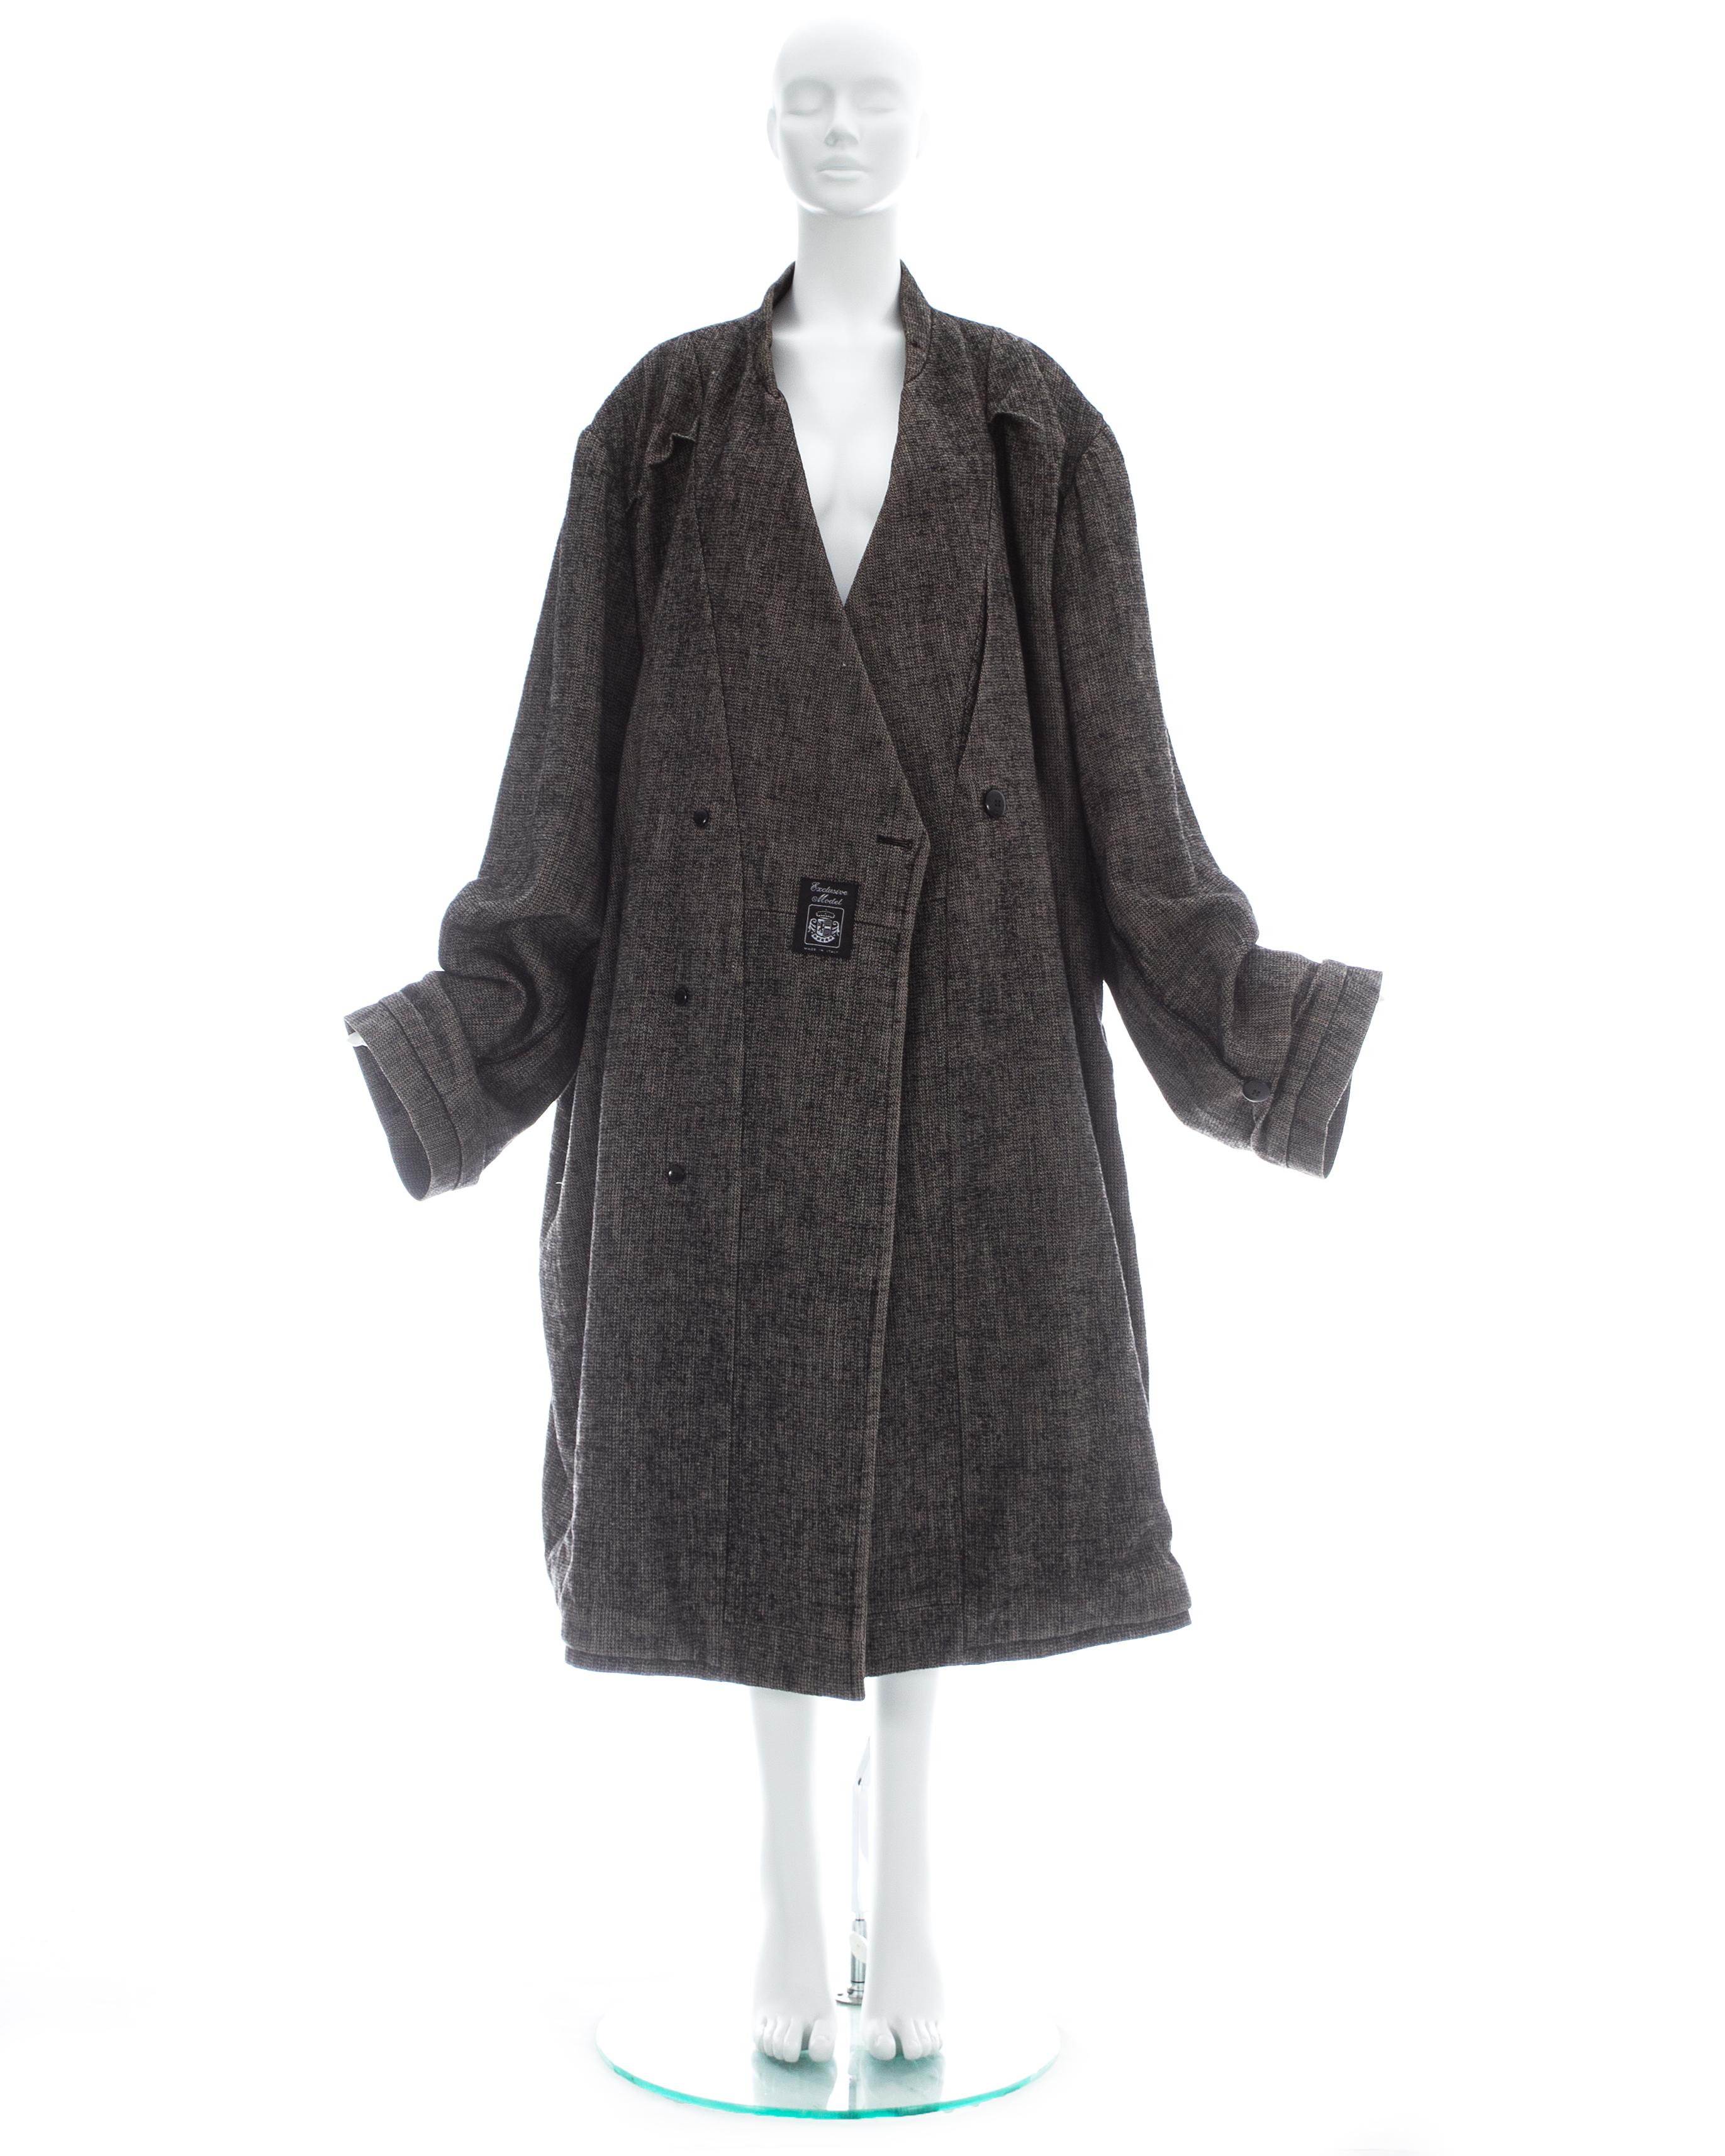 Margiela; Grey wool and linen blend XXL size 78 double inside coat with inverted overlocked seams, permanent creased sleeve cuffs and signature 'Exclusive Model' badge on both sides

Fall-Winter 2000